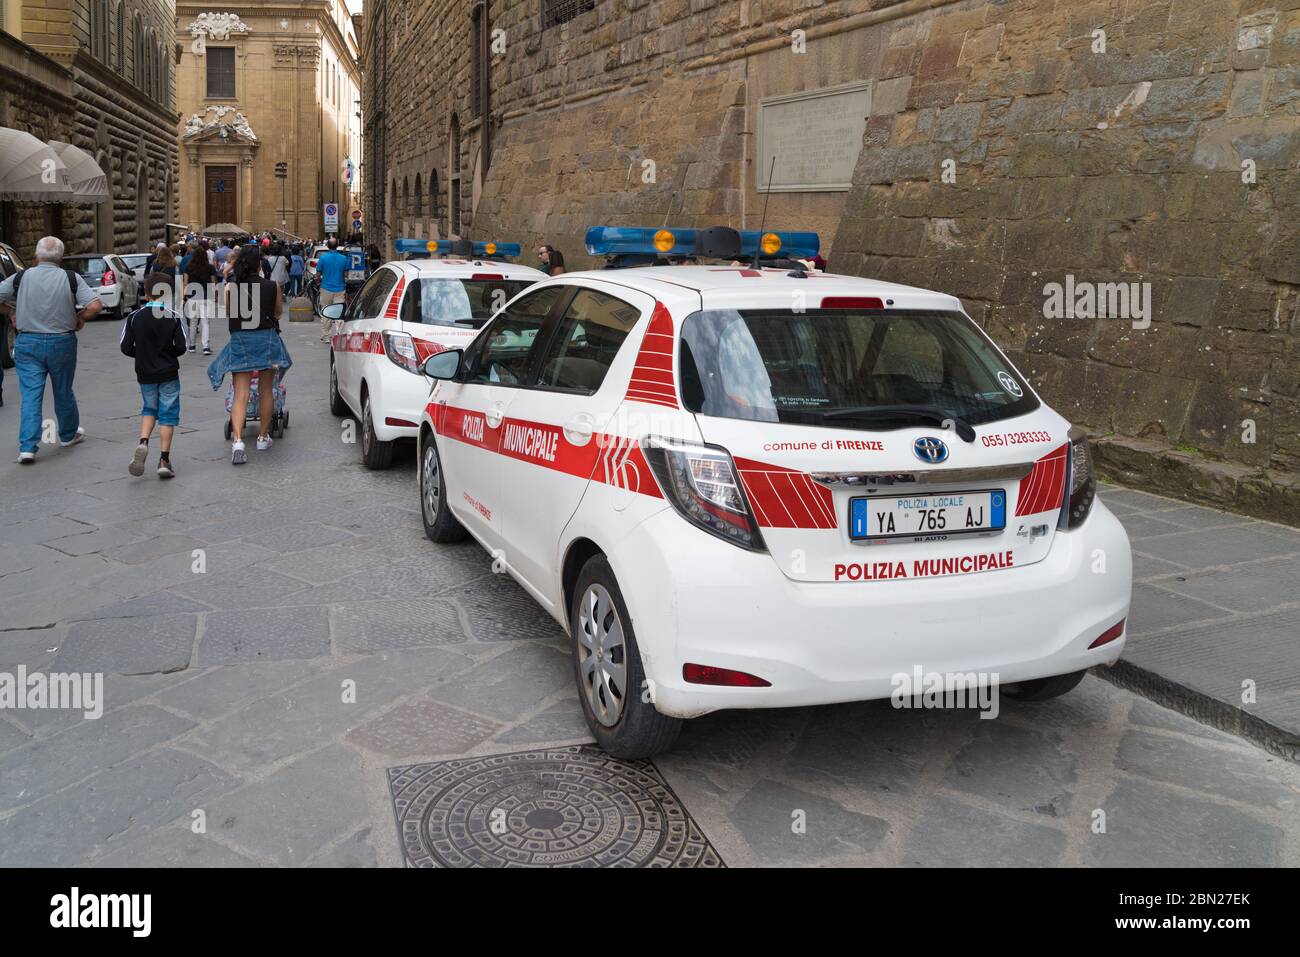 FLORENCE, ITALY - APRIL 21, 2019: Police cars in the tourist district of the city Stock Photo